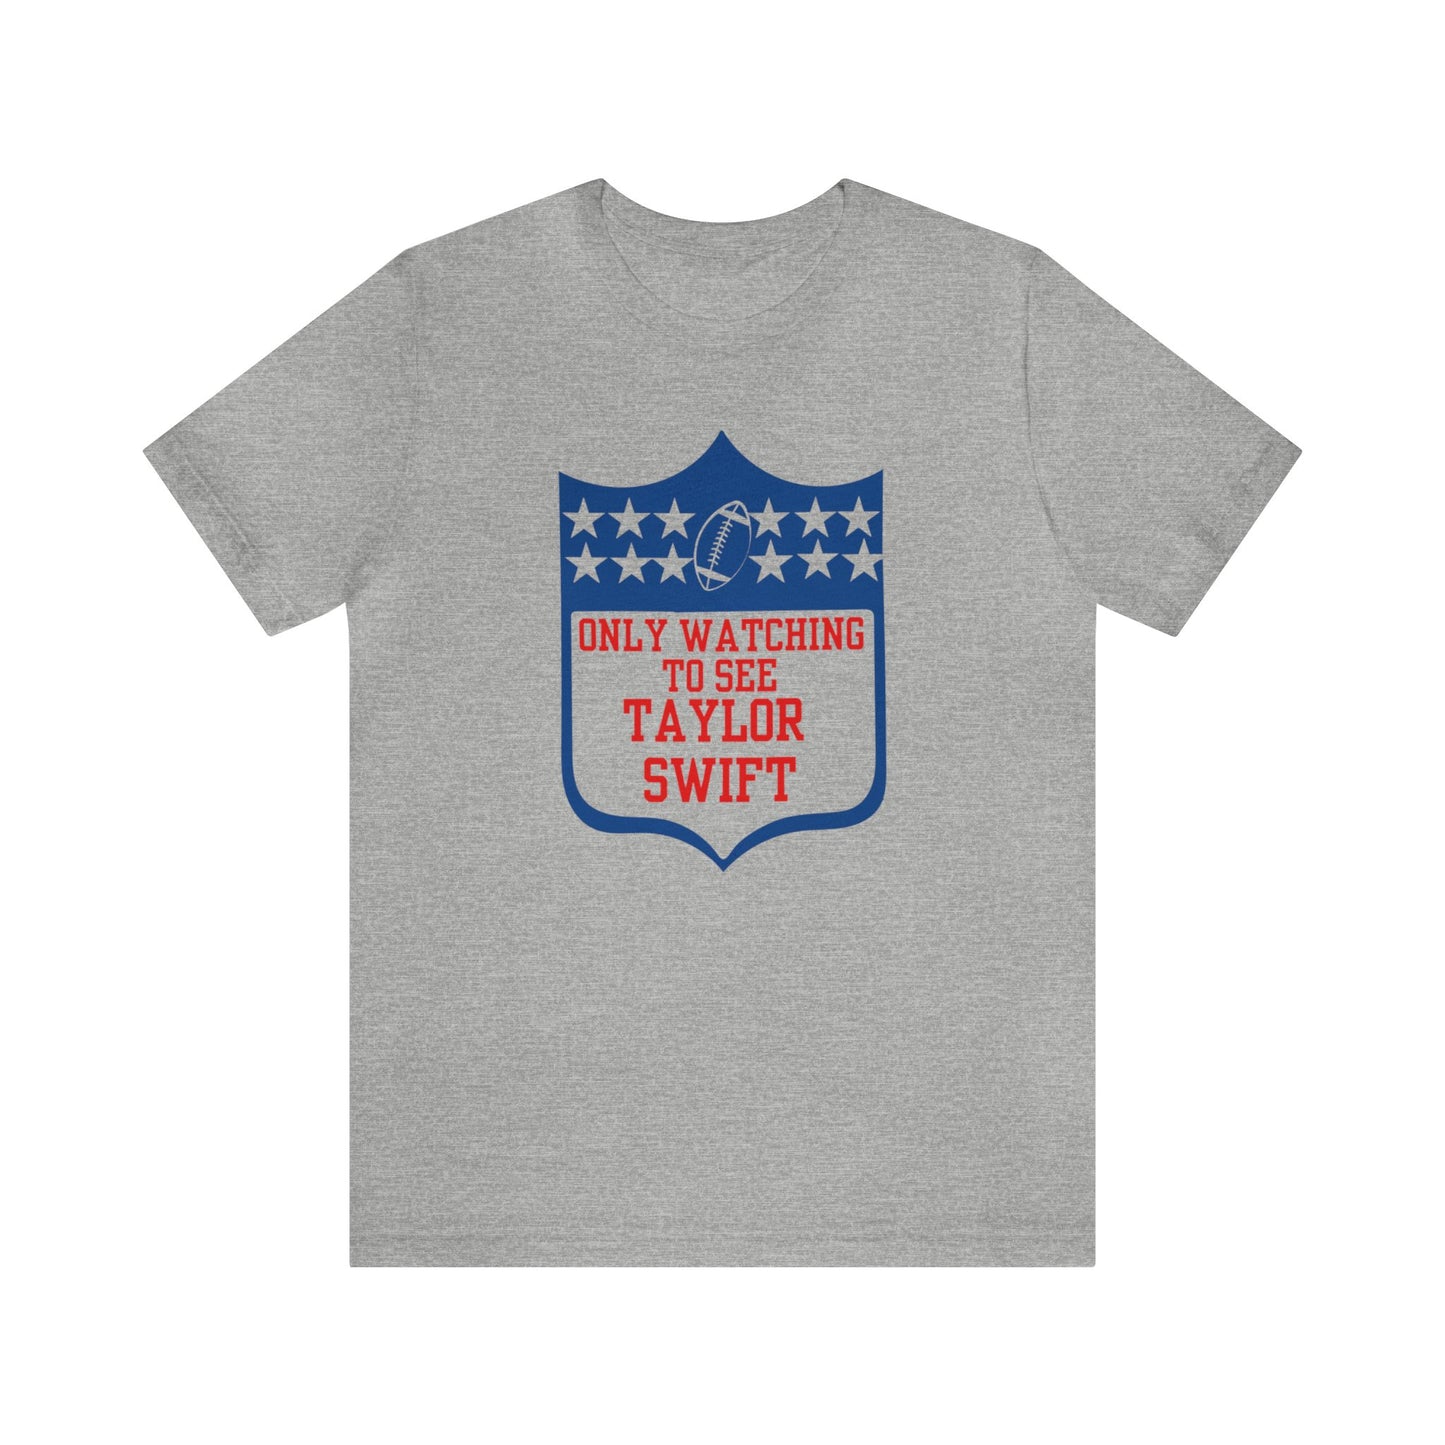 Taylor Swift Only Watching To See Her Unisex Jersey Short Sleeve Tee Shirt